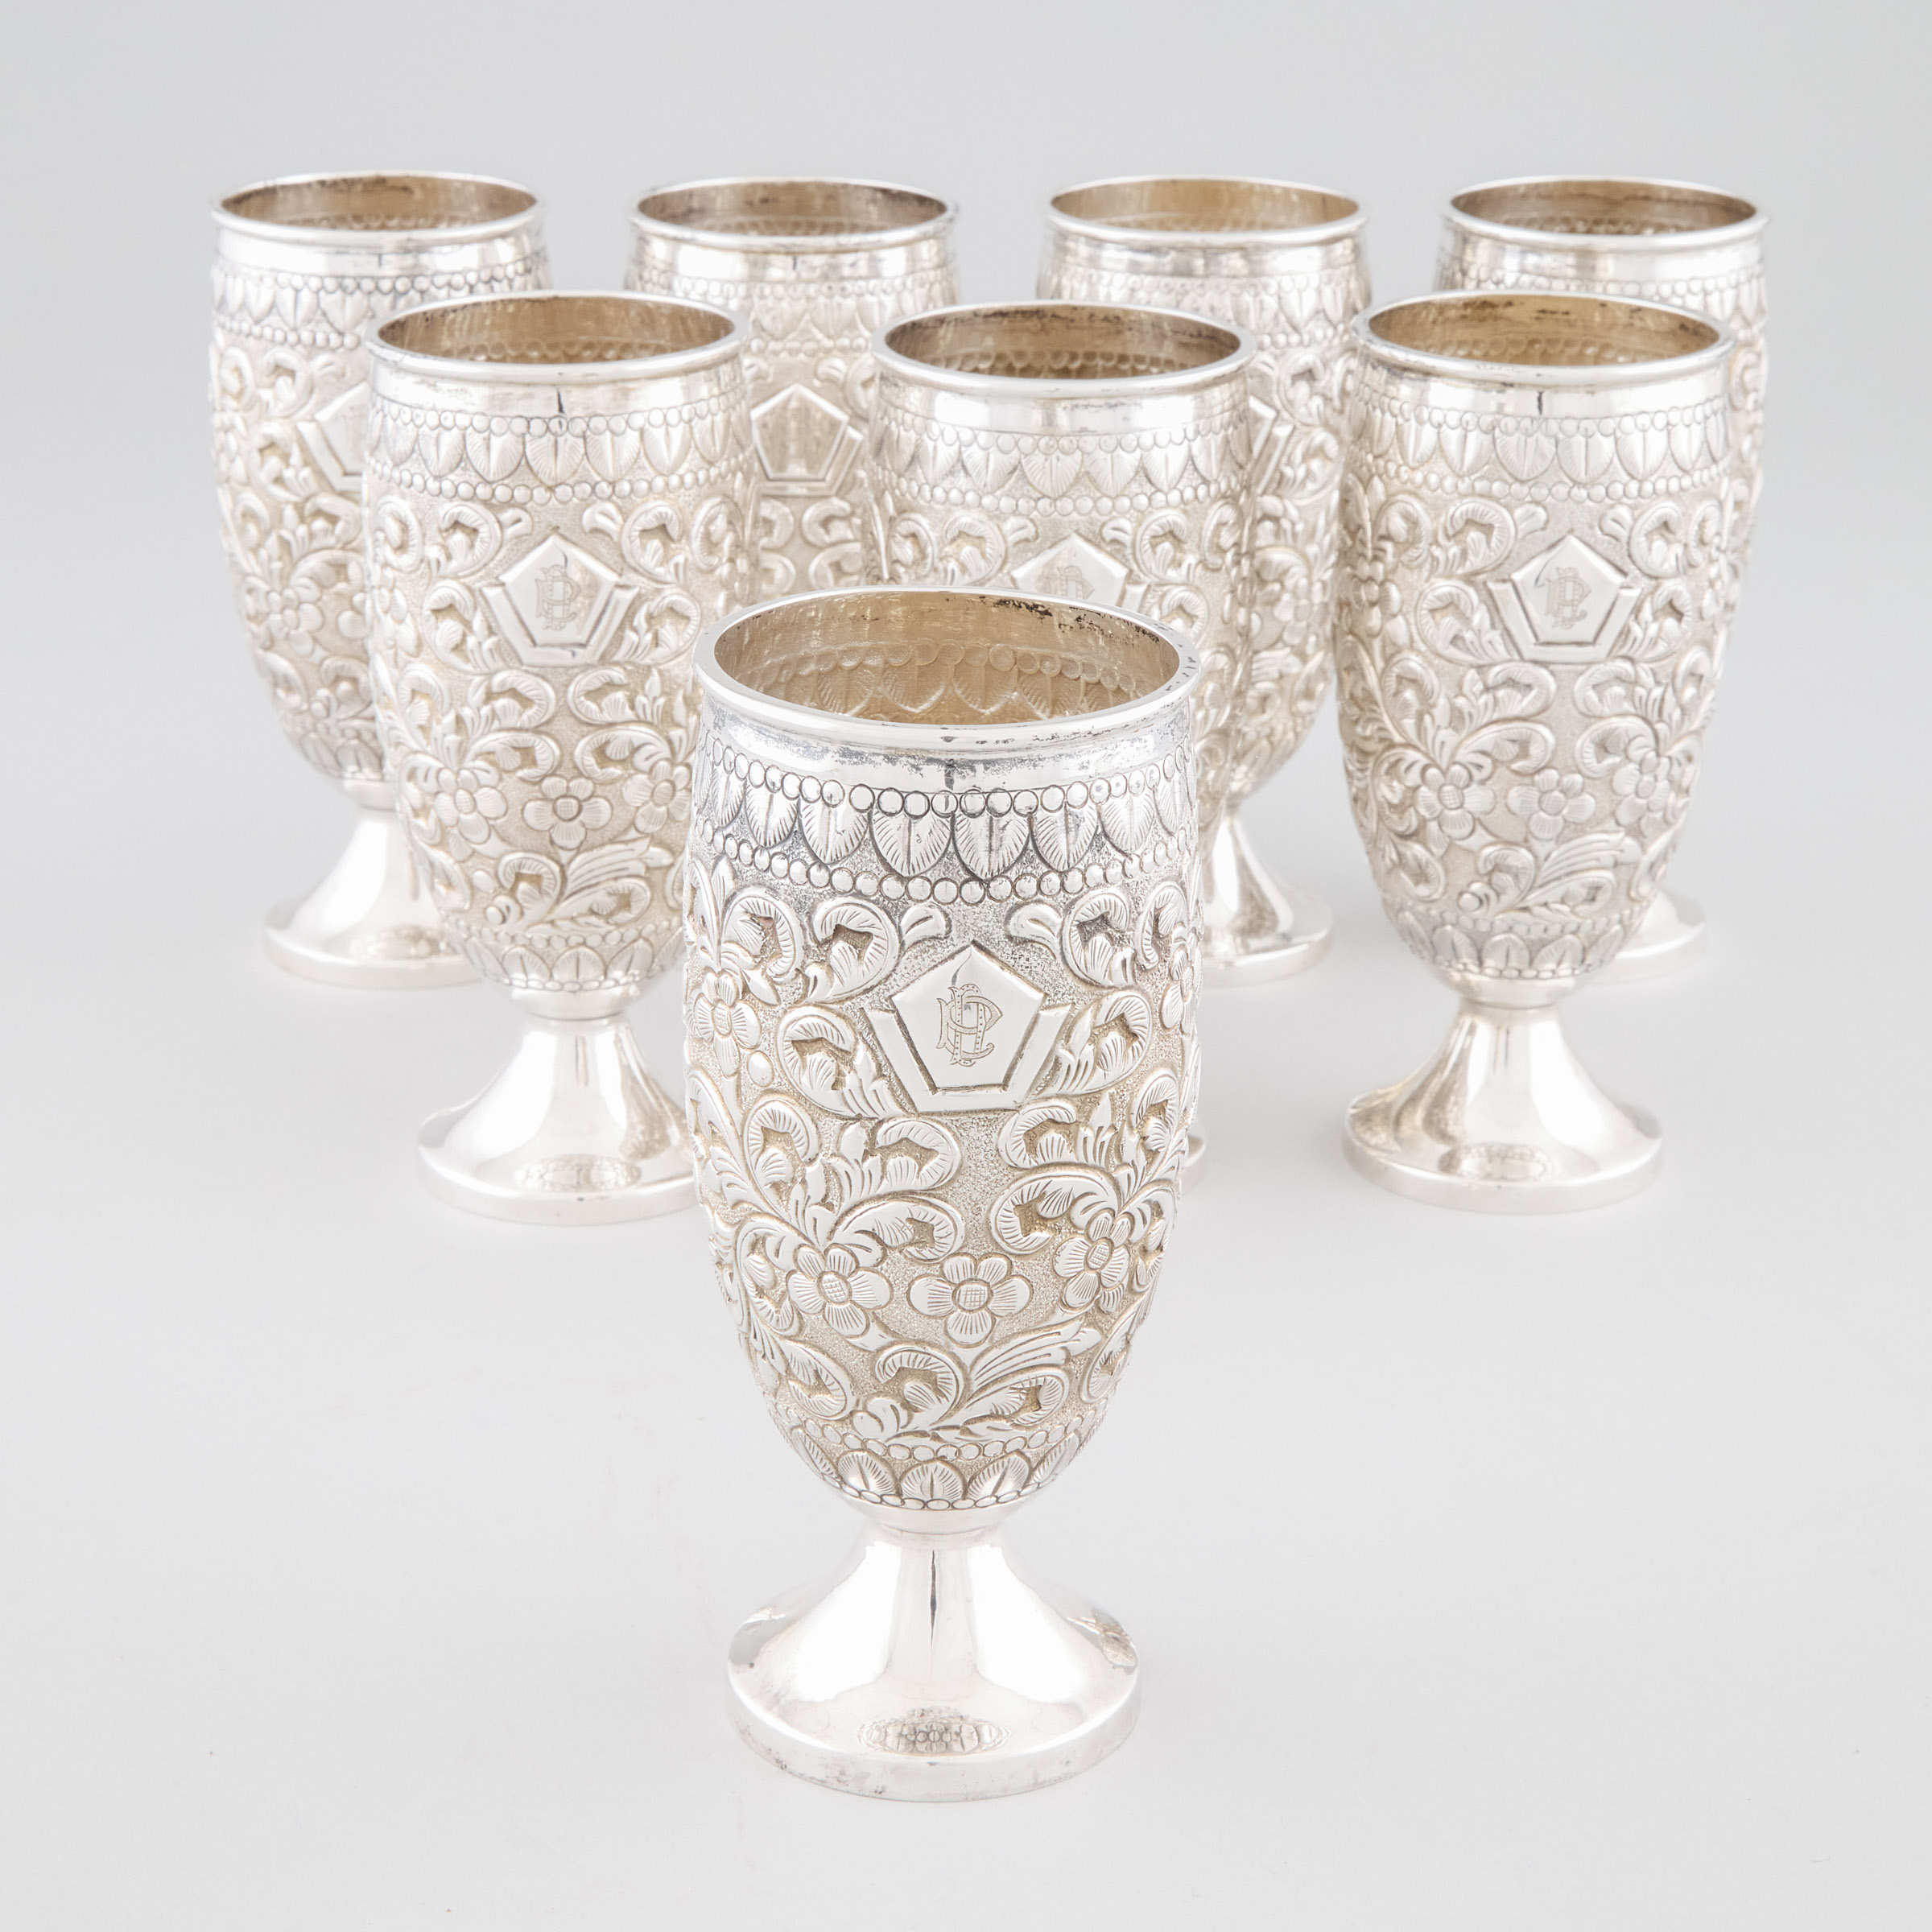 Eight Indian Repoussé and Engraved Silver Goblets, 20th century